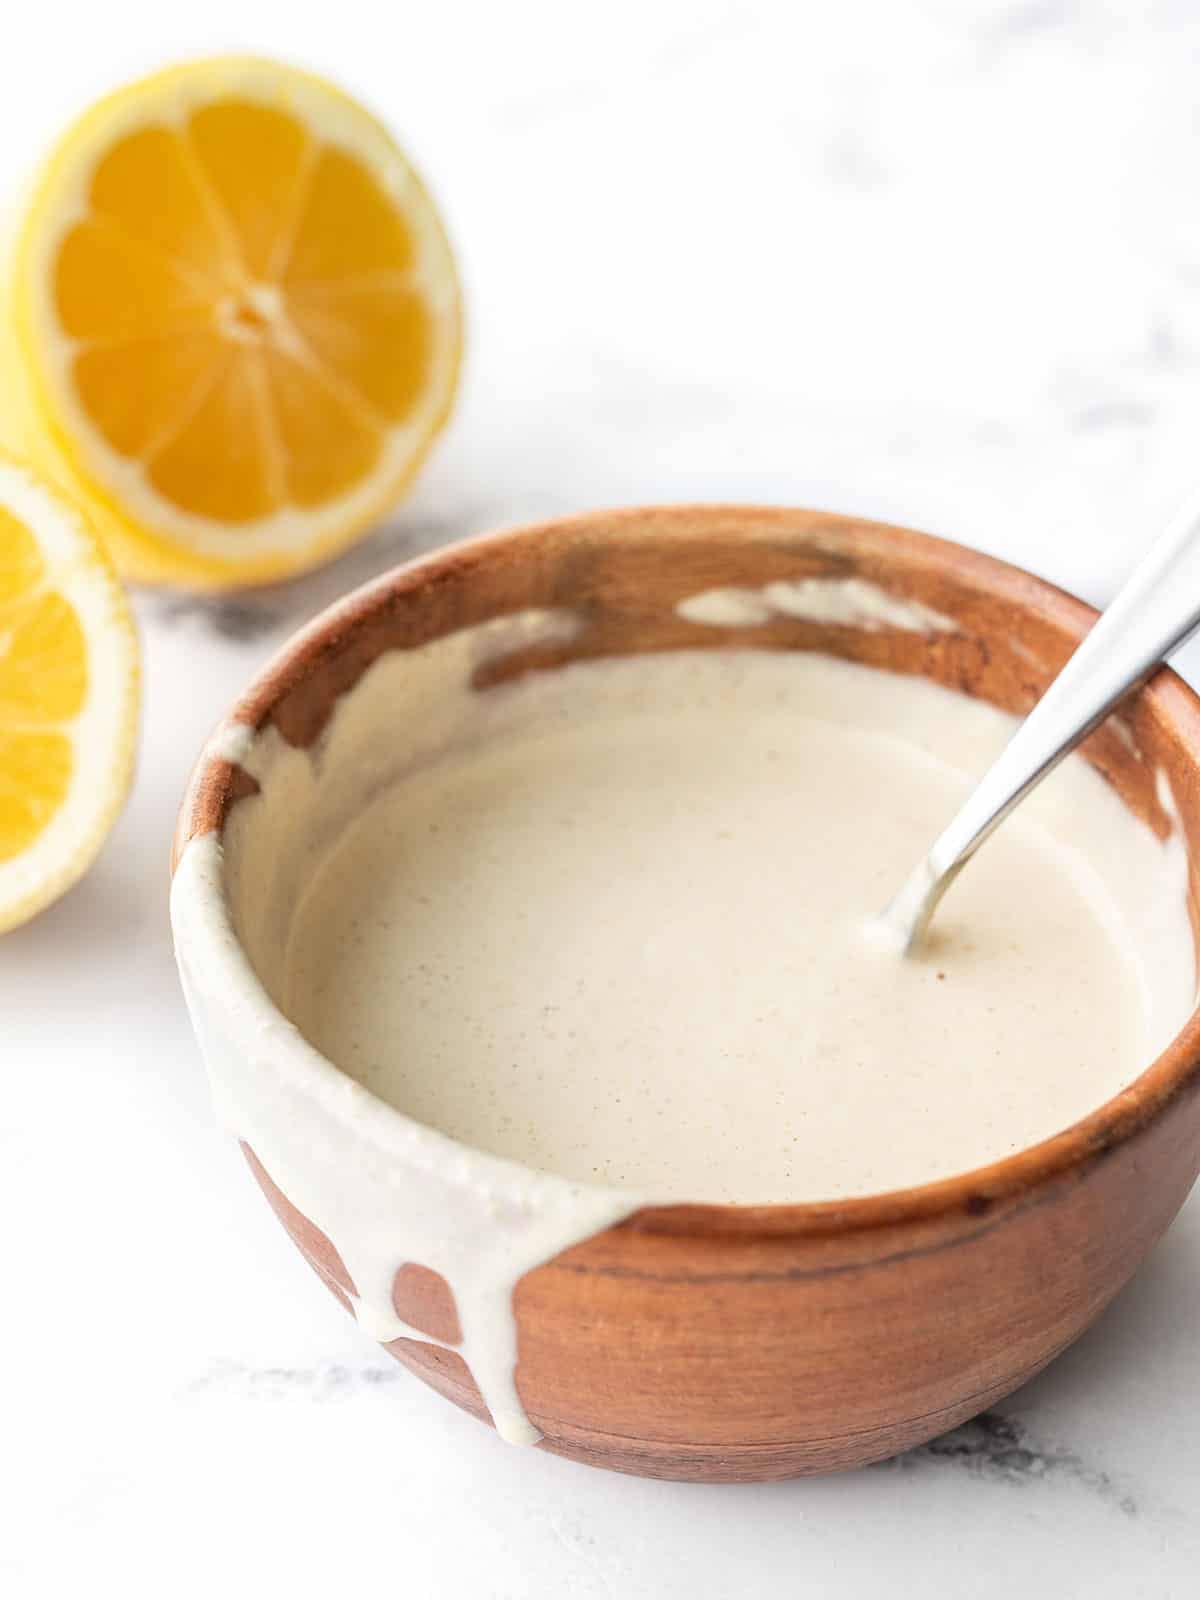 Lemon tahini dressing in a wooden bowl dripping over the side, a cut lemon in the back